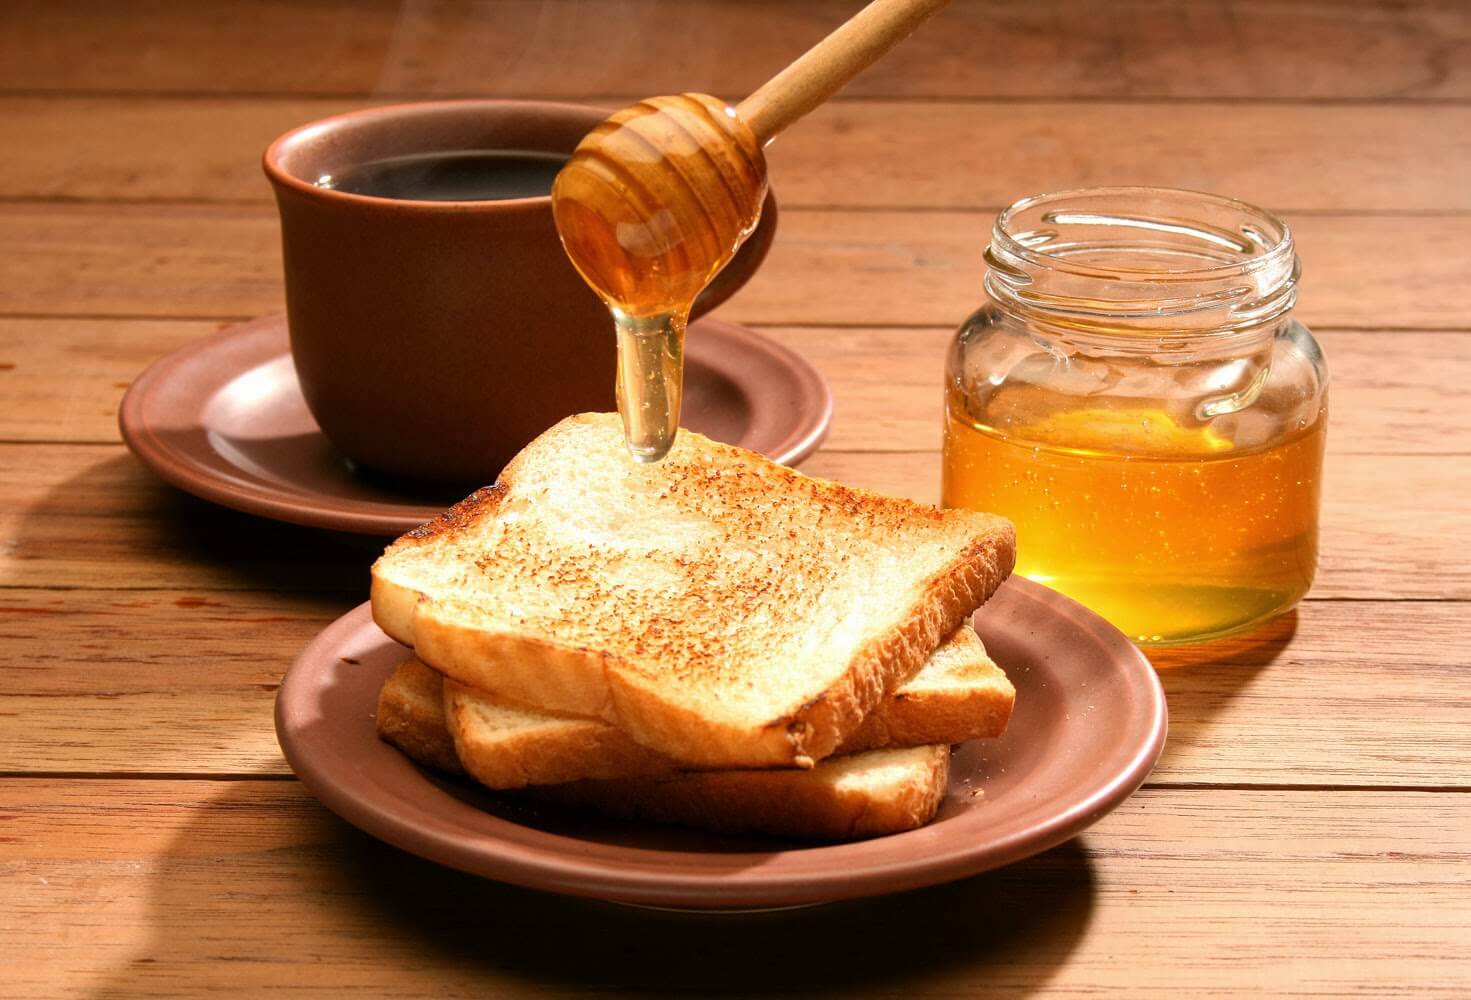 Pouring some honey on a toast.